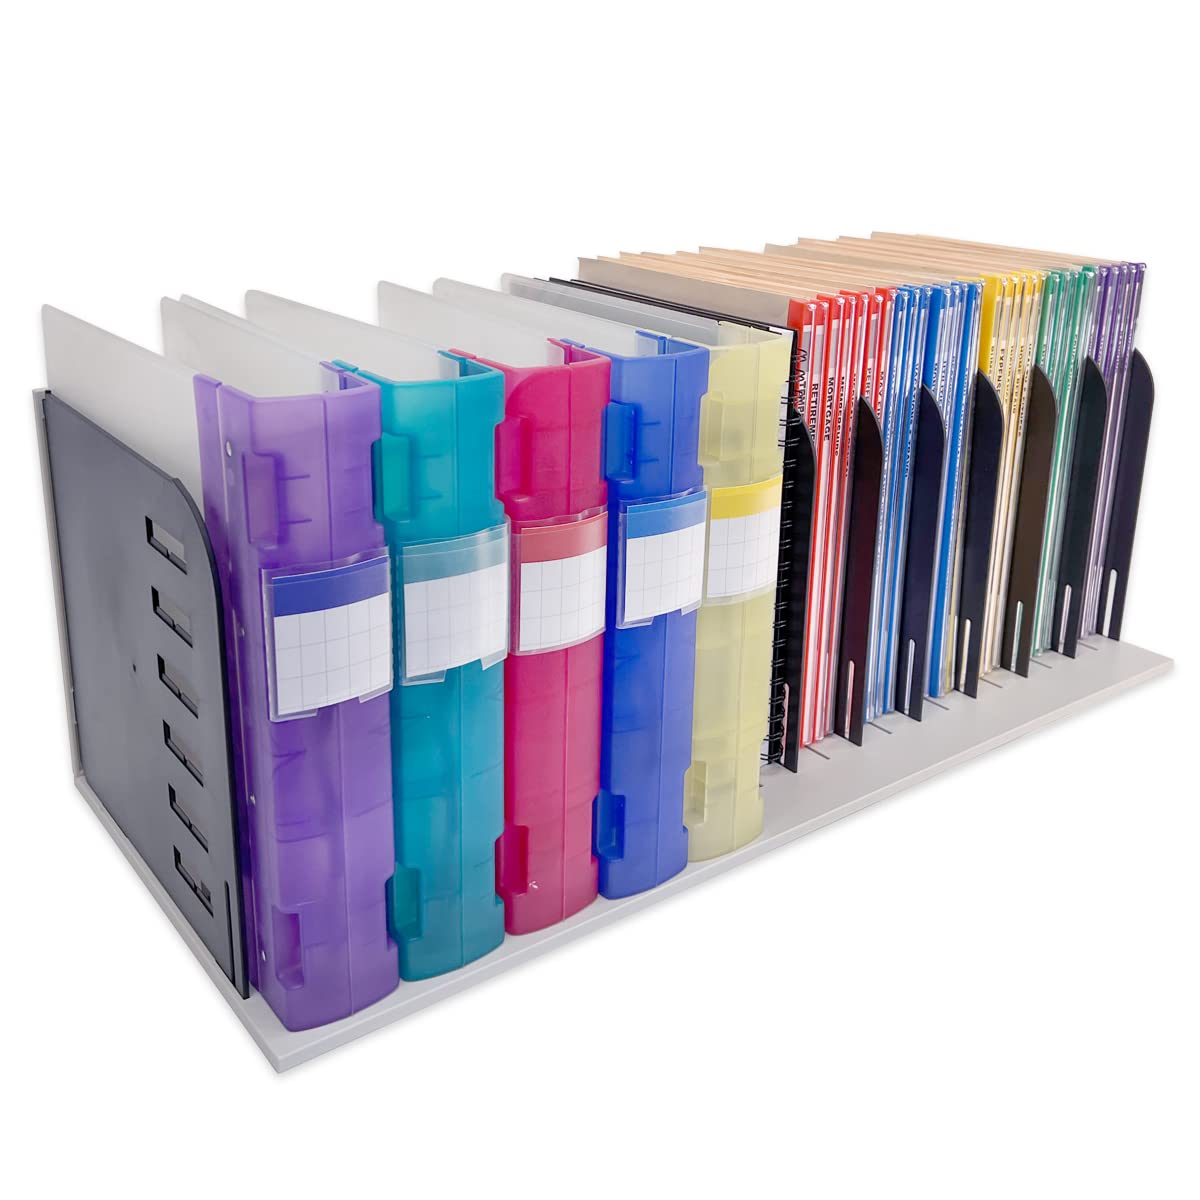 Ultimate Office TierDrop Topper 8 Slot Vertical File Organizer and Sorter with 9 Dividers That Adjust in 1 inch Increments. Converts Into A Hanging